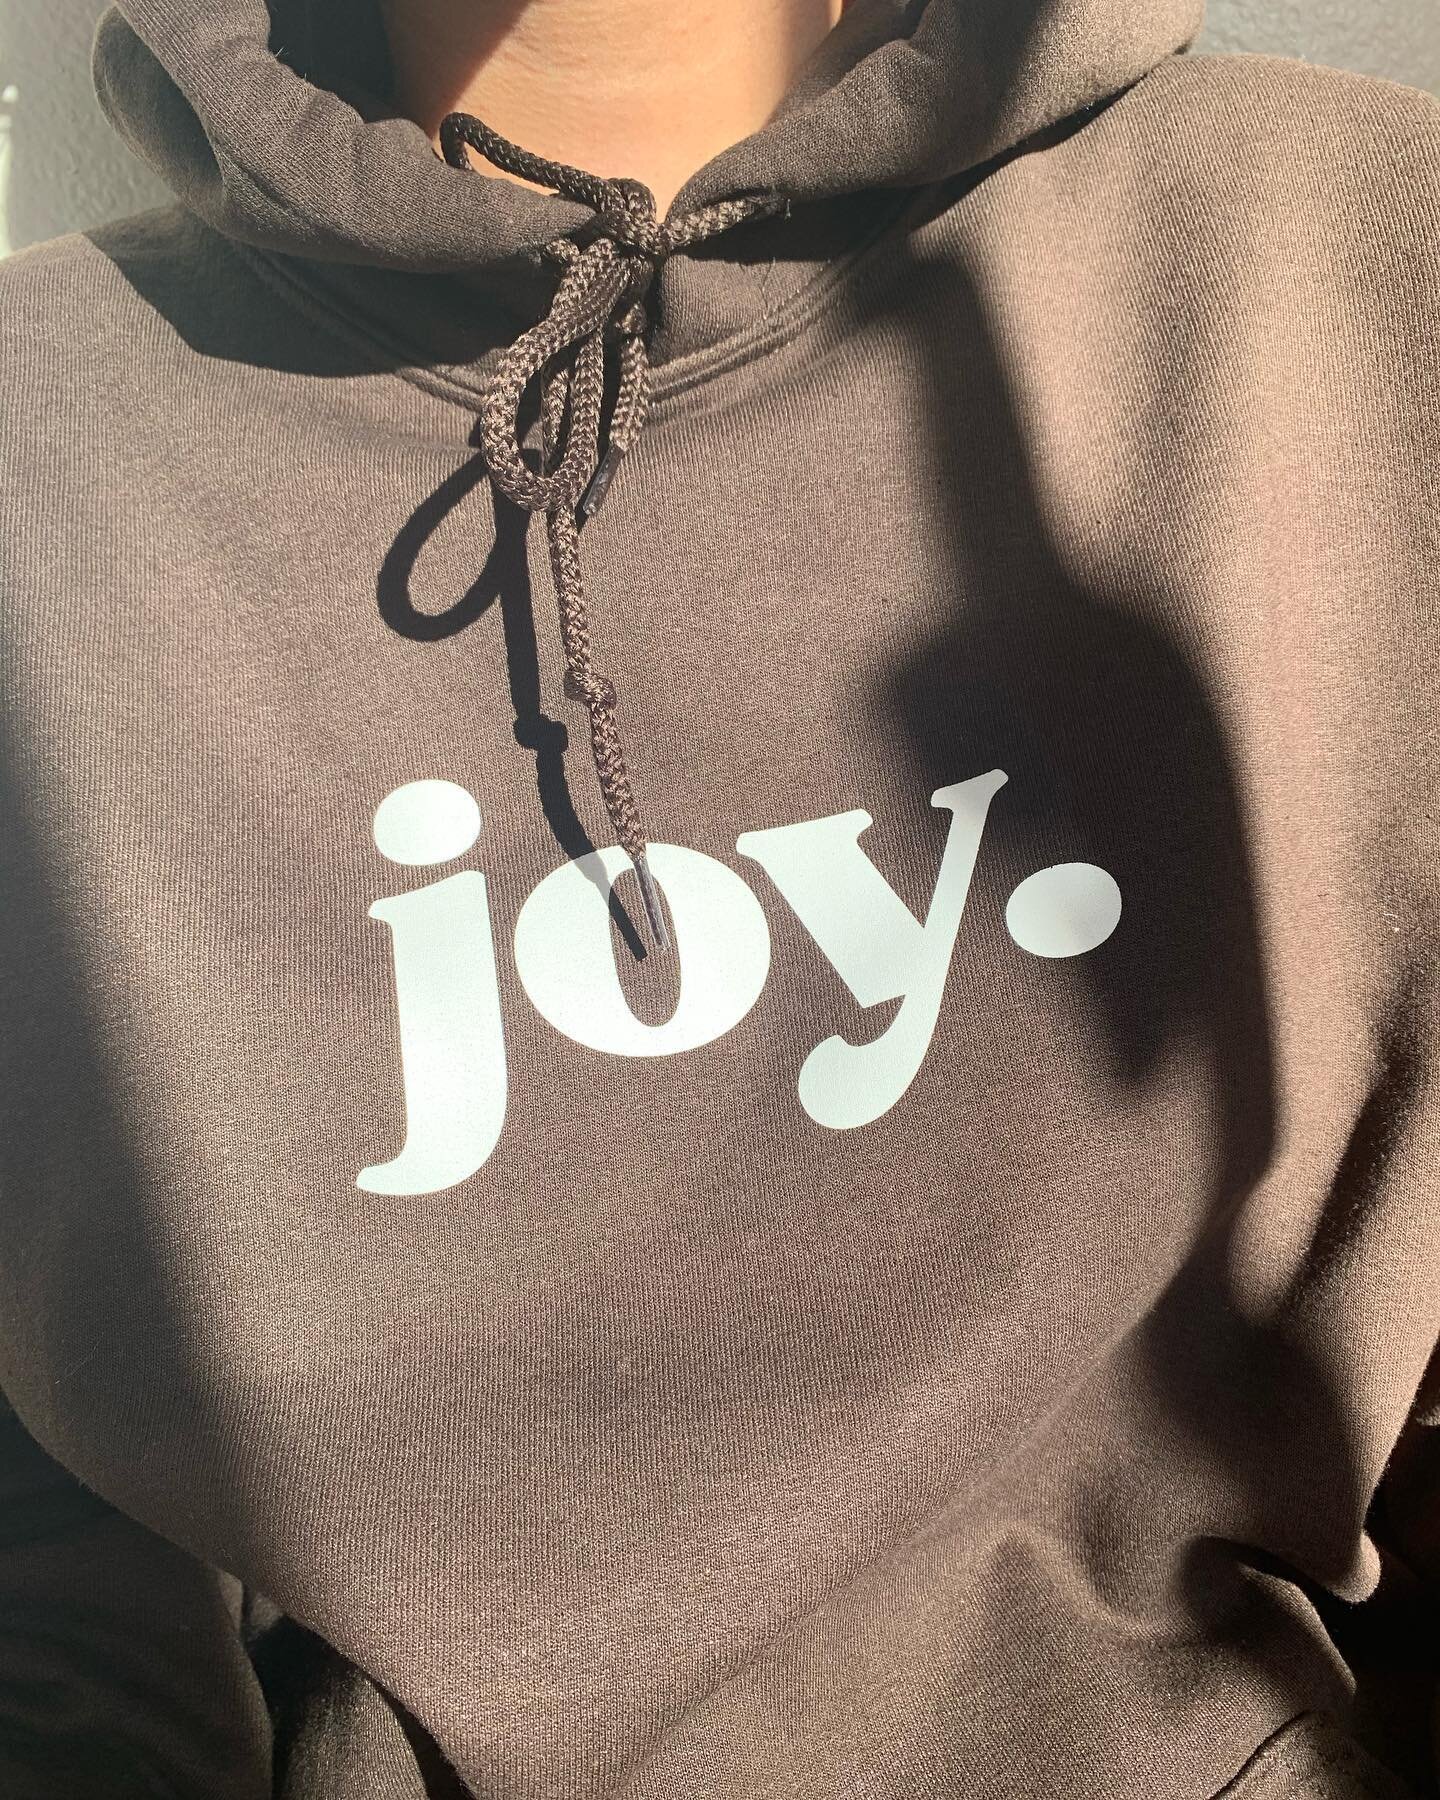 Introducing the first of our unisex BEING collection of hoodies: Joy.

Being all the things that we seek is the quickest road to receiving it. This collection was inspired by the art of BEING. Being joy. Being peace. Being love. Being freedom. Being 